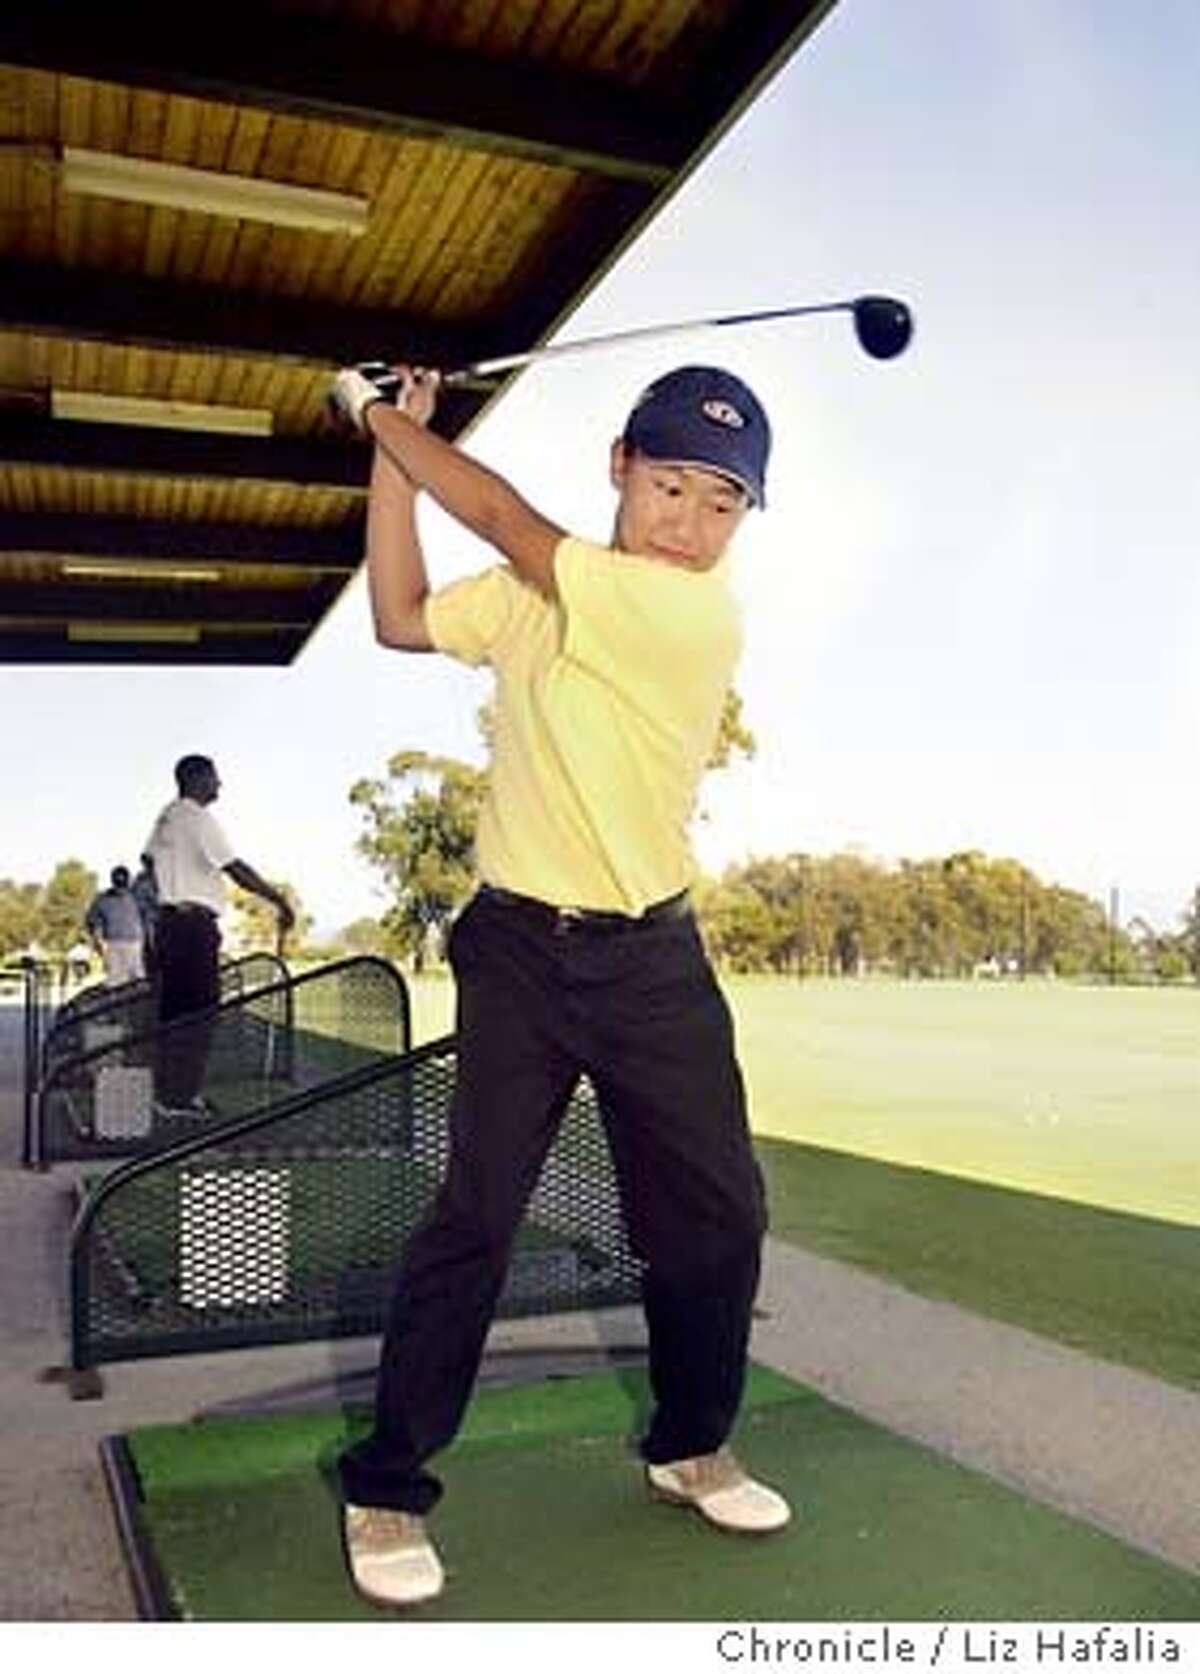 Ki-Shui Liao, 15 years old, is an outstanding young golfer who competes on the boys team of Alameda High school. She practices nearly every day and is at the driving range of Chuck Corica Golf Course. Shot on 7/3/03 in Alameda. LIZ HAFALIA / The Chronicle